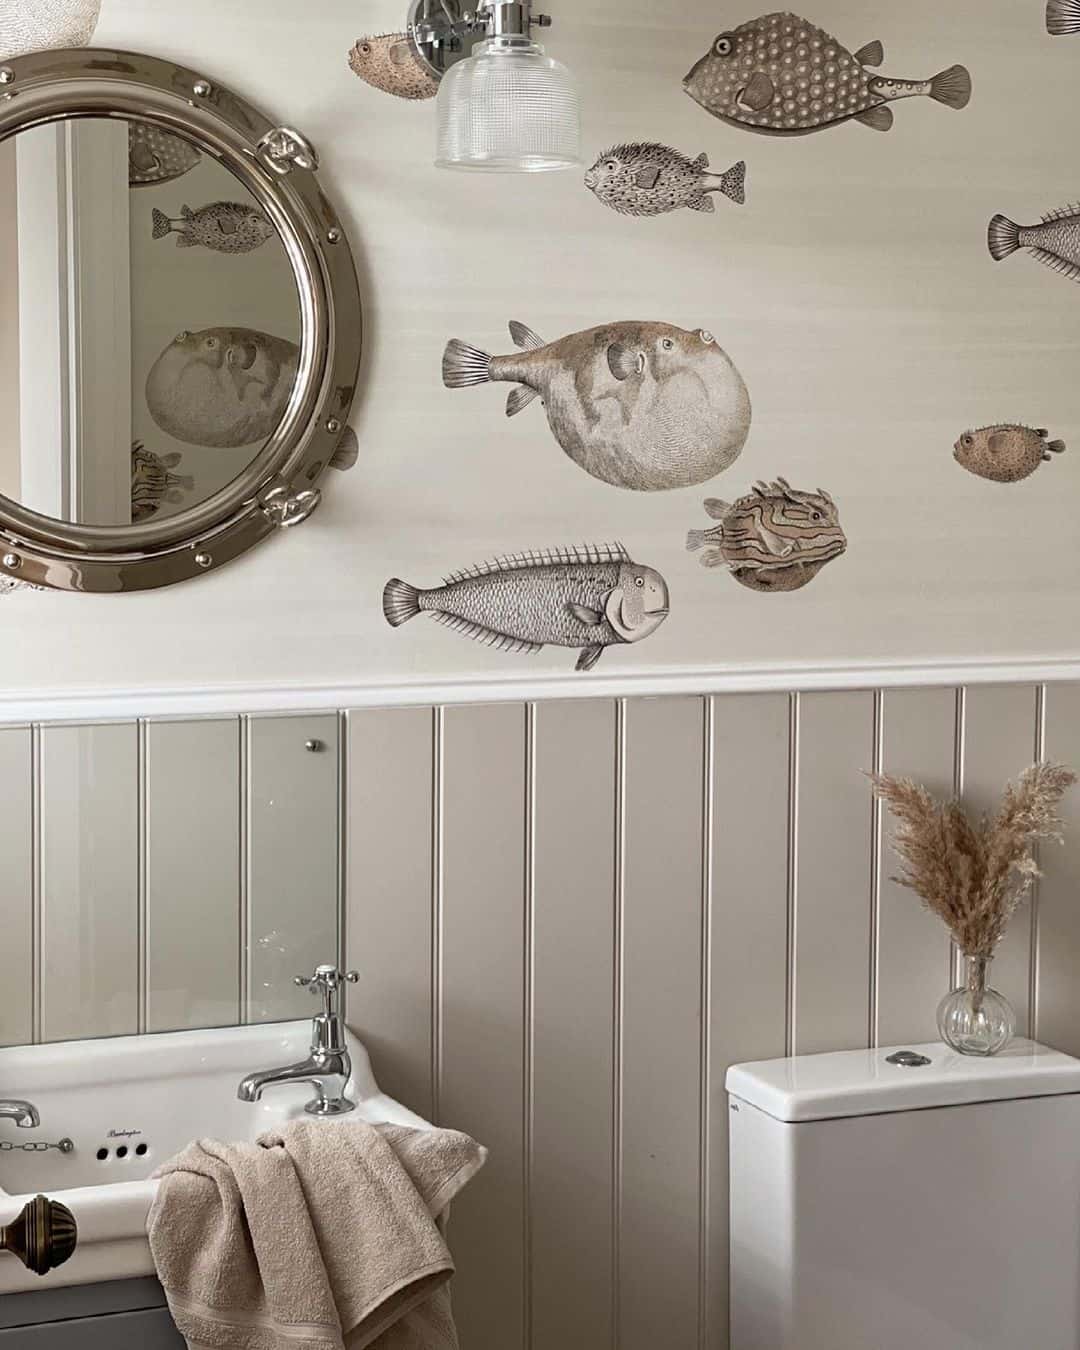 Coastal Bathroom Ideas That Will Stand The Test of Time A Designers Tips